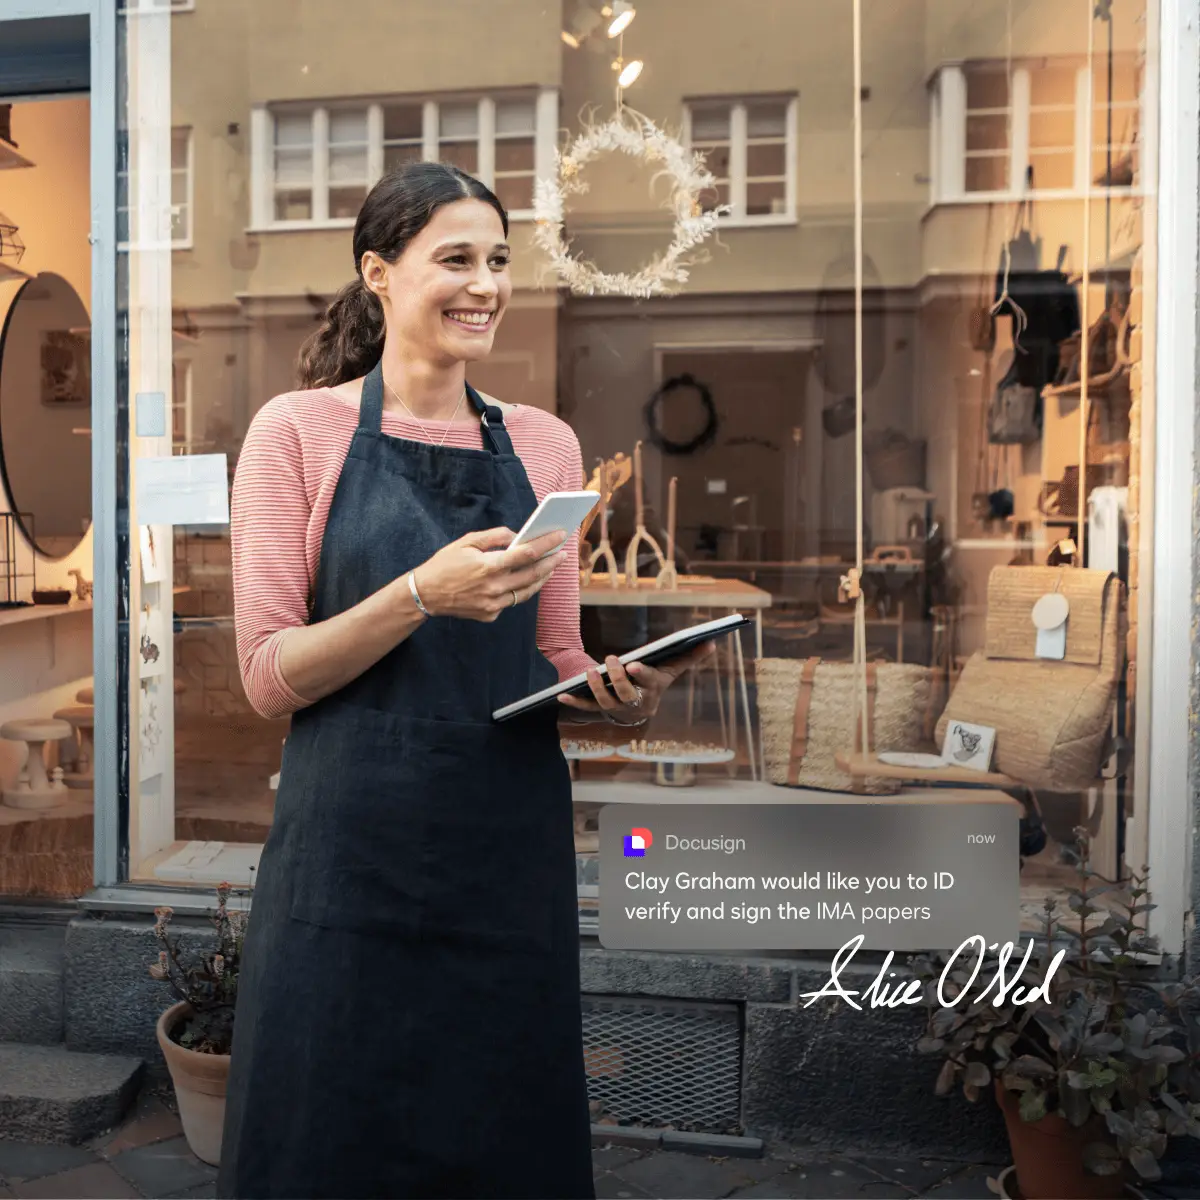 Person holding a phone and tablet smiling outside a small business